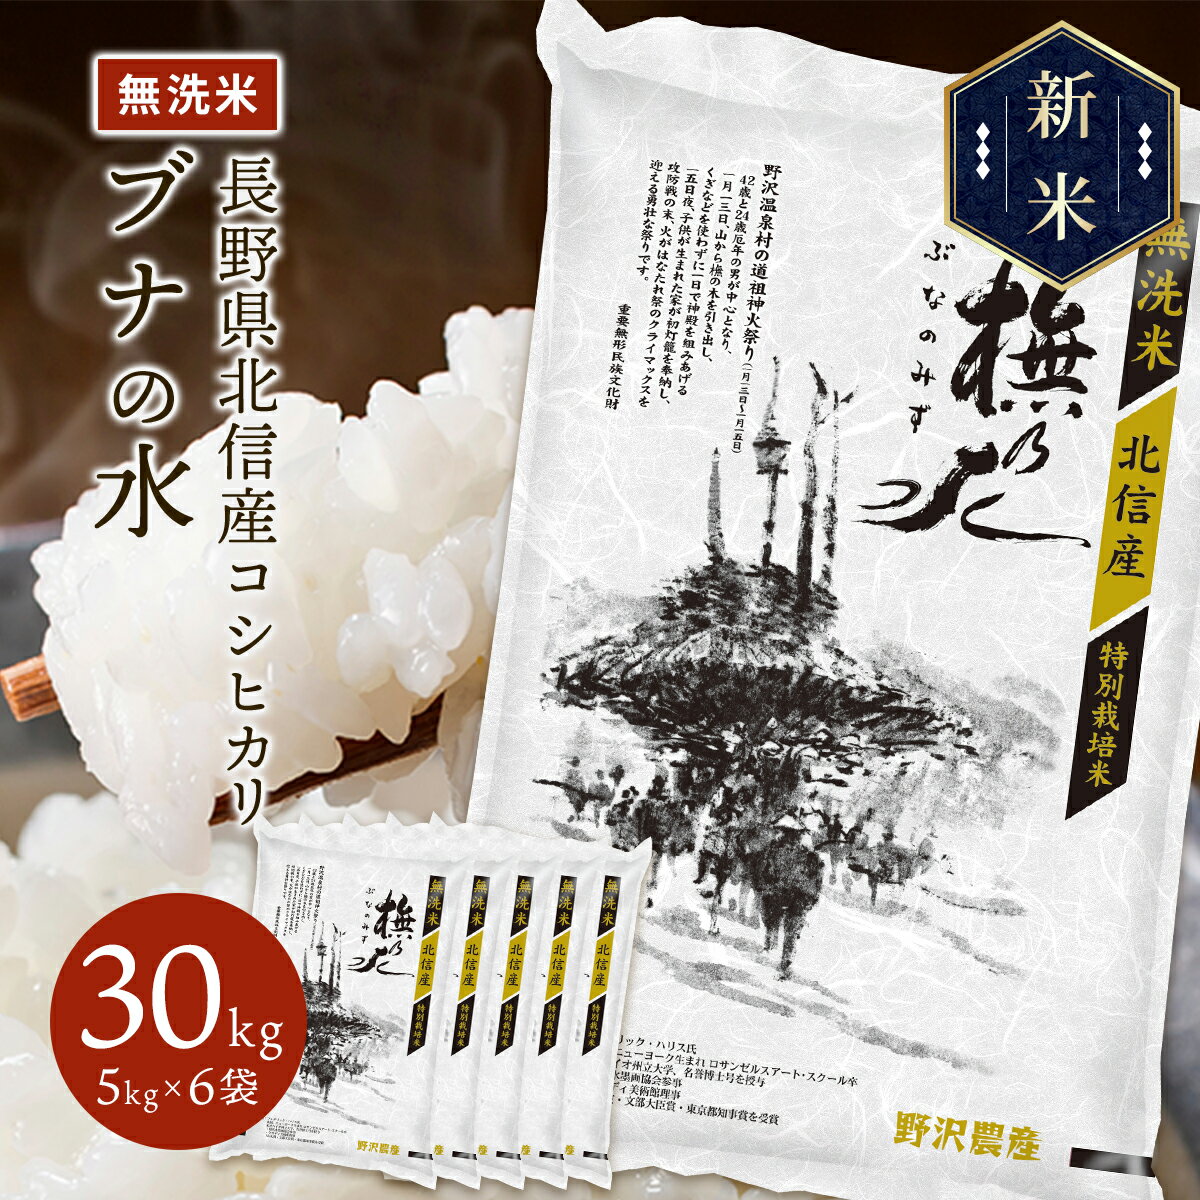 【10％OFFクーポン】 19日20:00〜25日9:59 新米 令和5年産 無洗米...